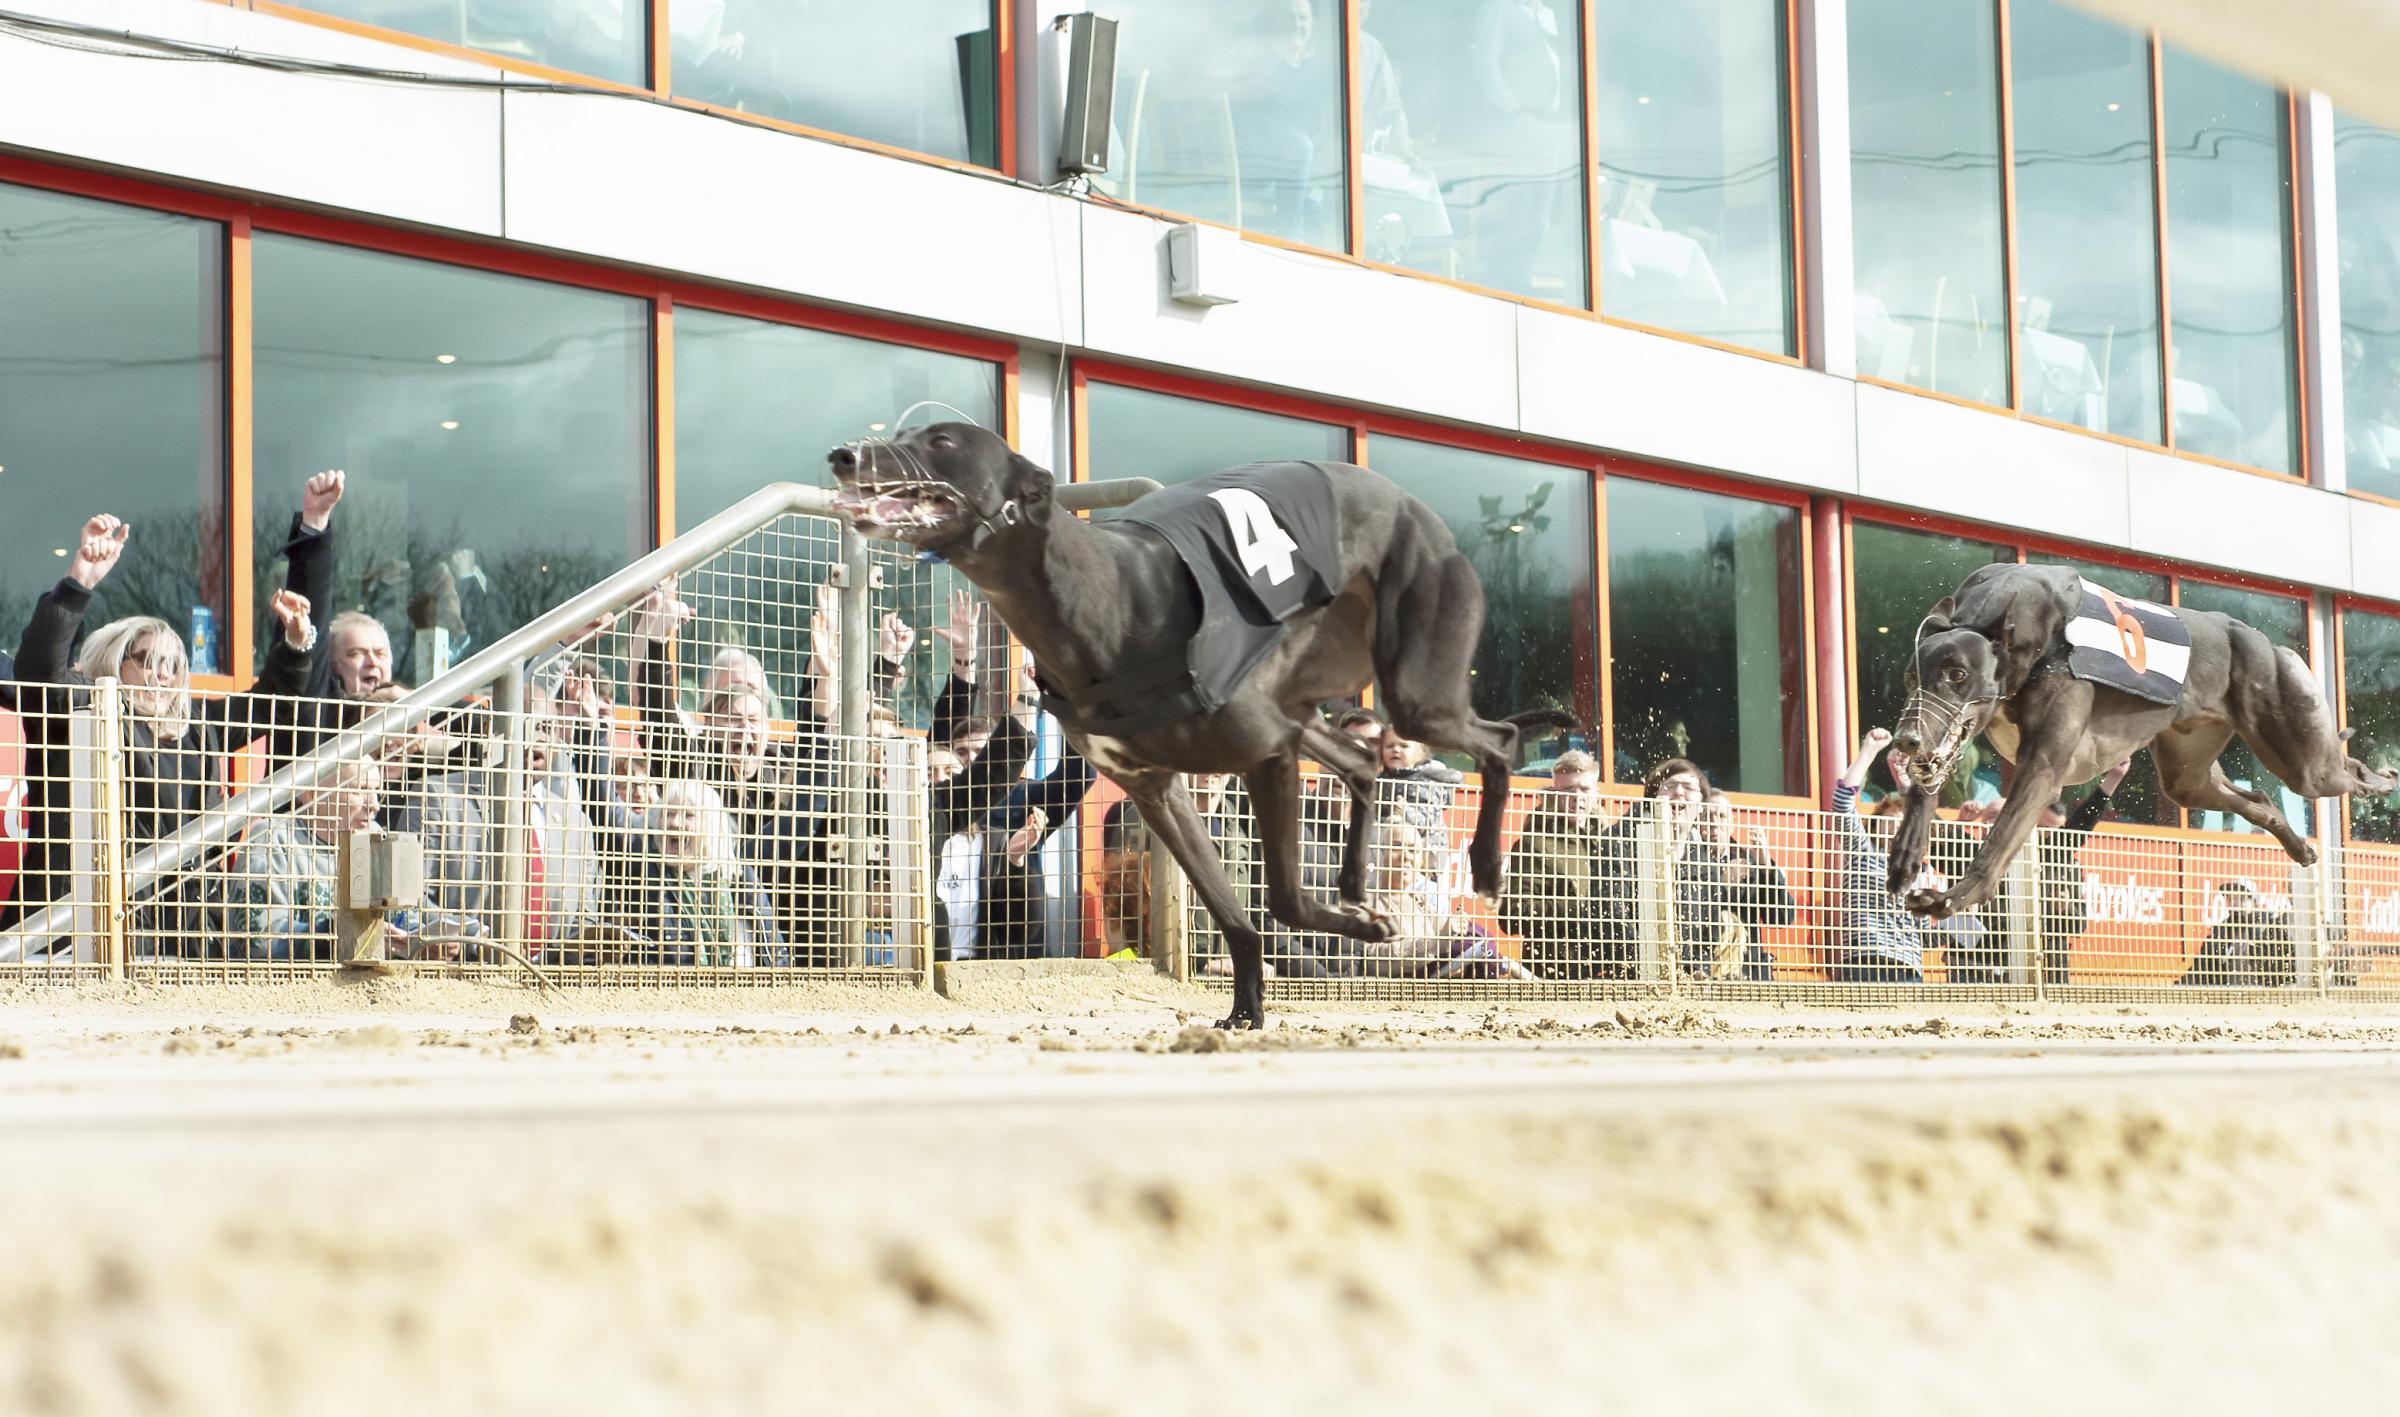 Connections (left) of Skilful Sandie cheer home their Golden Jacket winner as Antigua Fire (t6) misses out for the second year running. Crayford. Photo: © Steve Nash